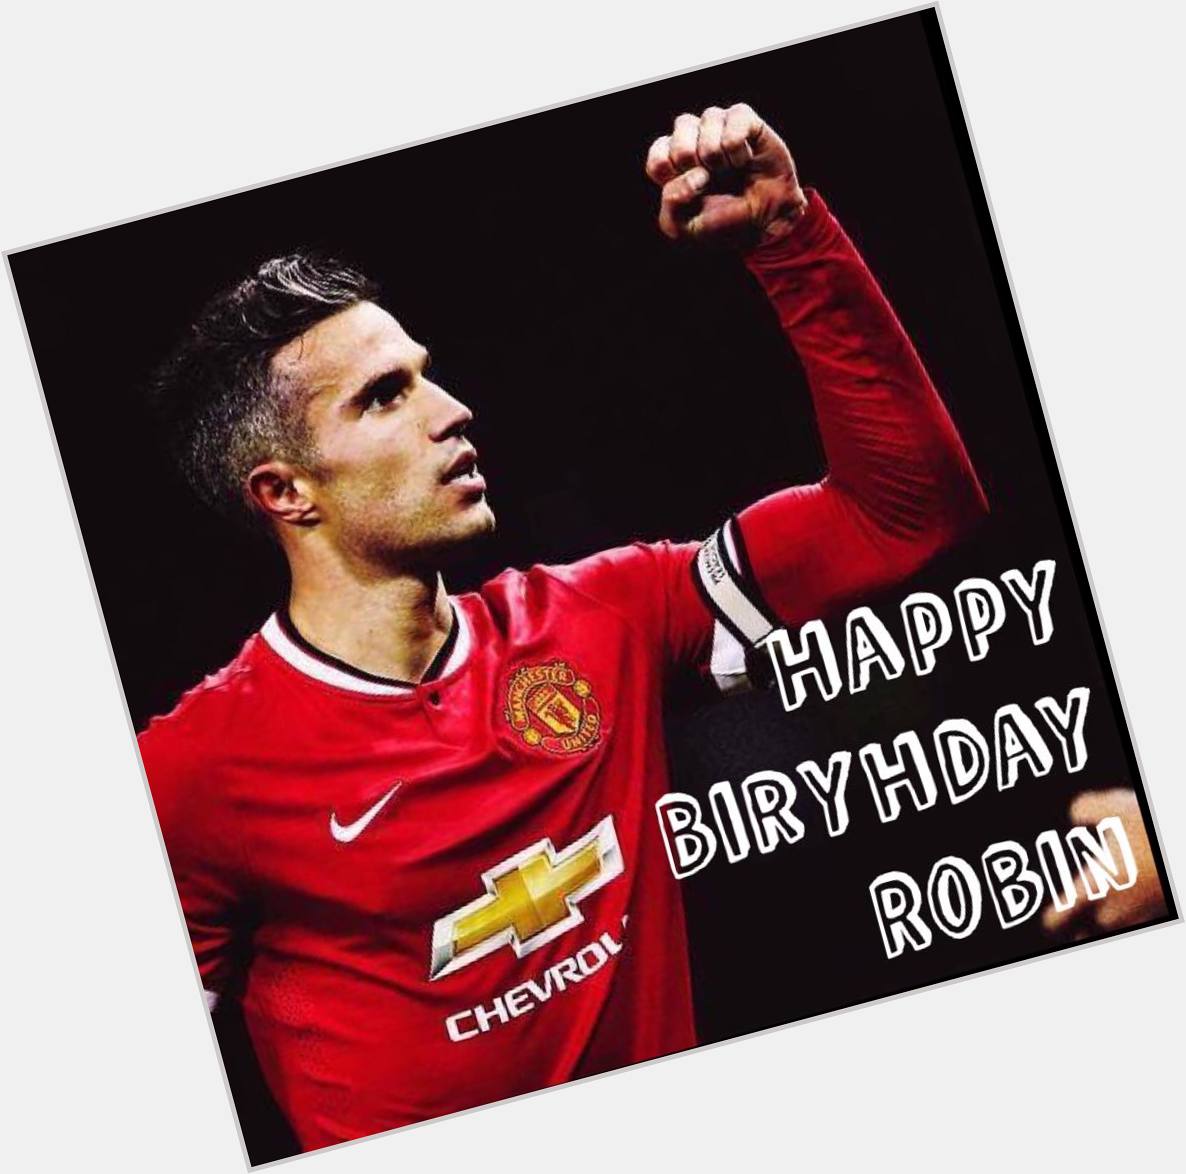 Happy Birthday to our former talisman Robin Van Persie..,
Thank You for the 20th once again..

Oh Robin.... 